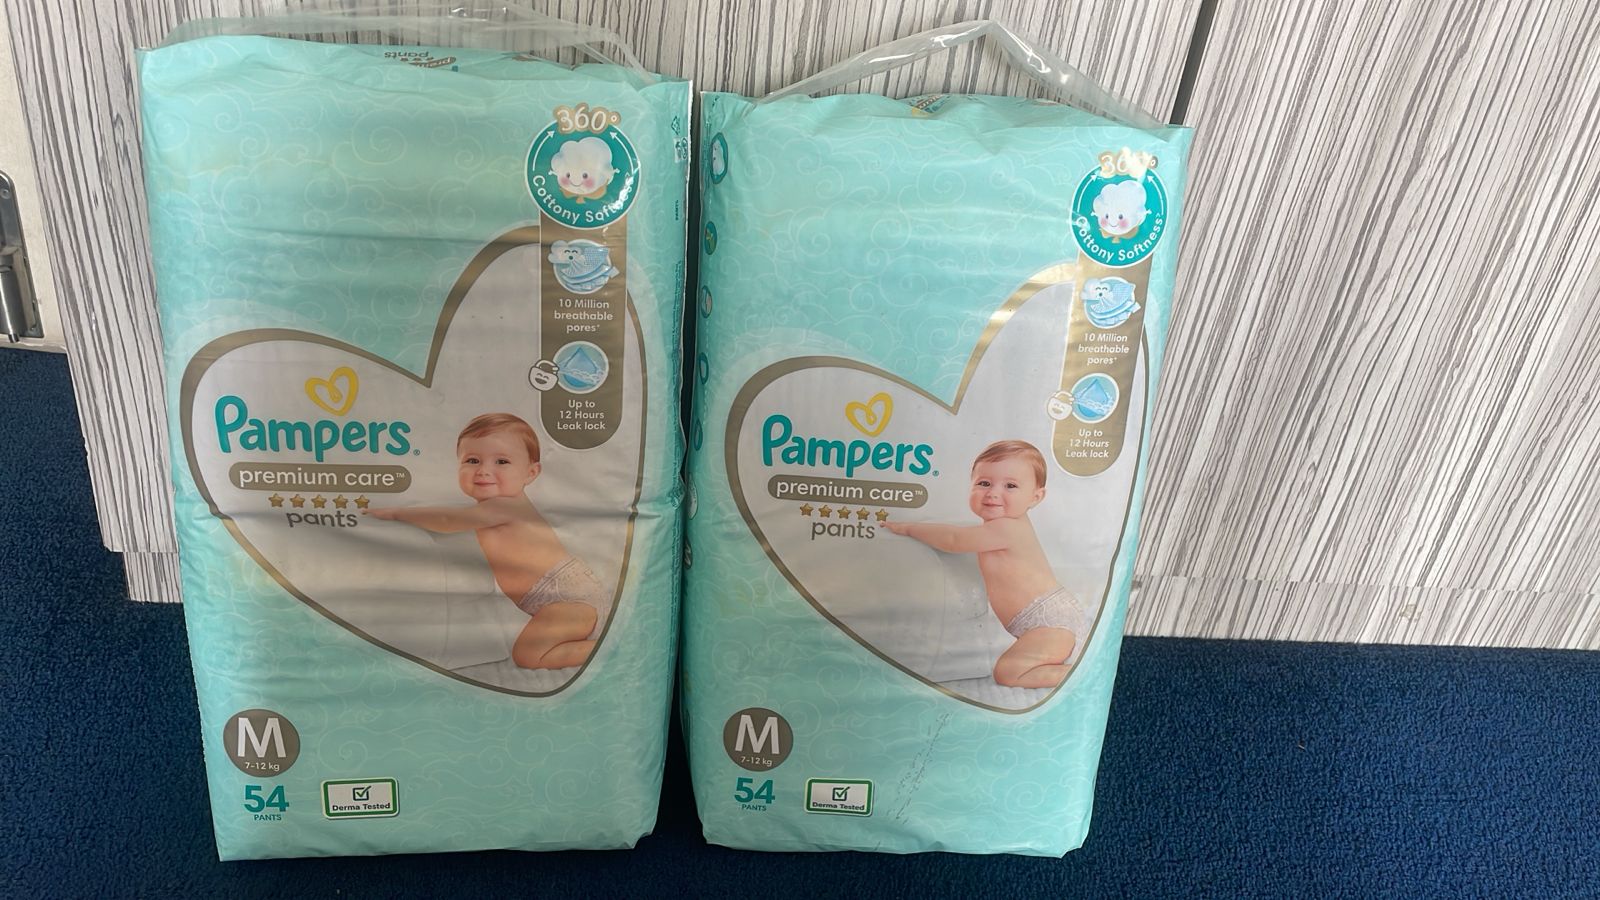 Pampers Premium Care Pants, New Born, Extra Small size baby diapers  (NB,XS), 50 count, Softest